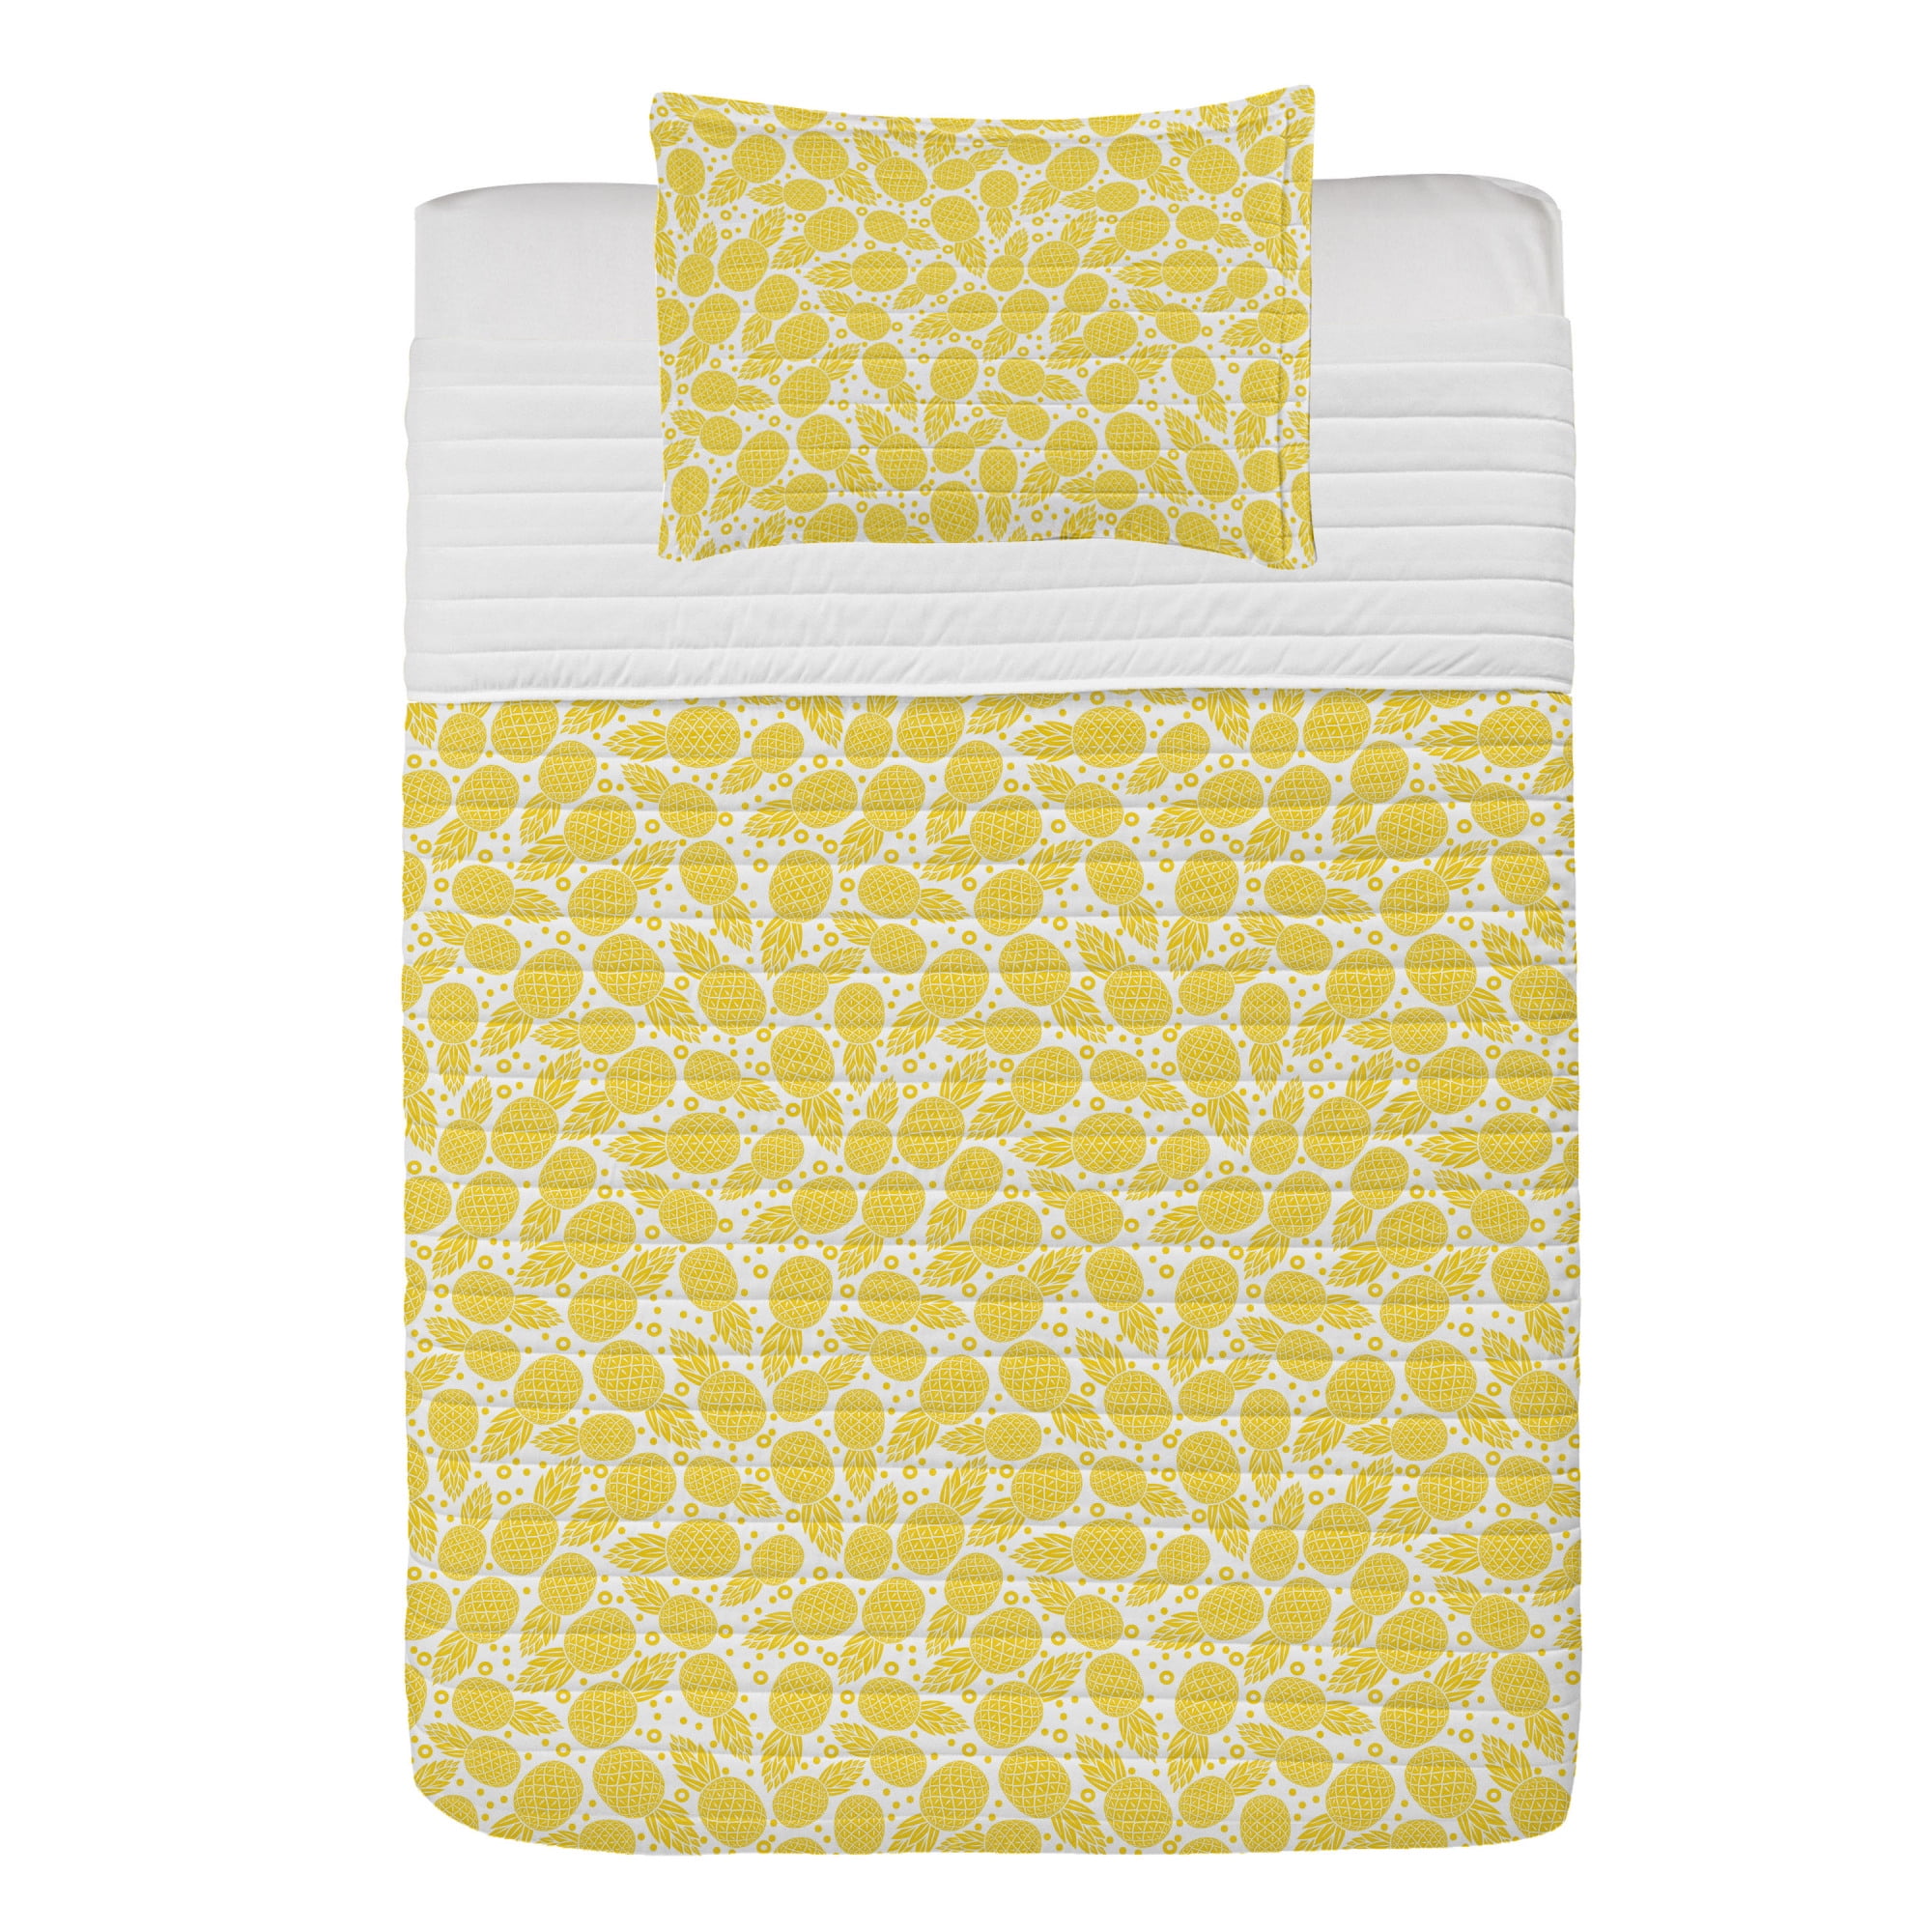 BEAUTIFUL TROPICAL EXOTIC CHIC BLUE YELLOW WHITE GLOBAL BOHEMIAN SOFT QUILT SET 